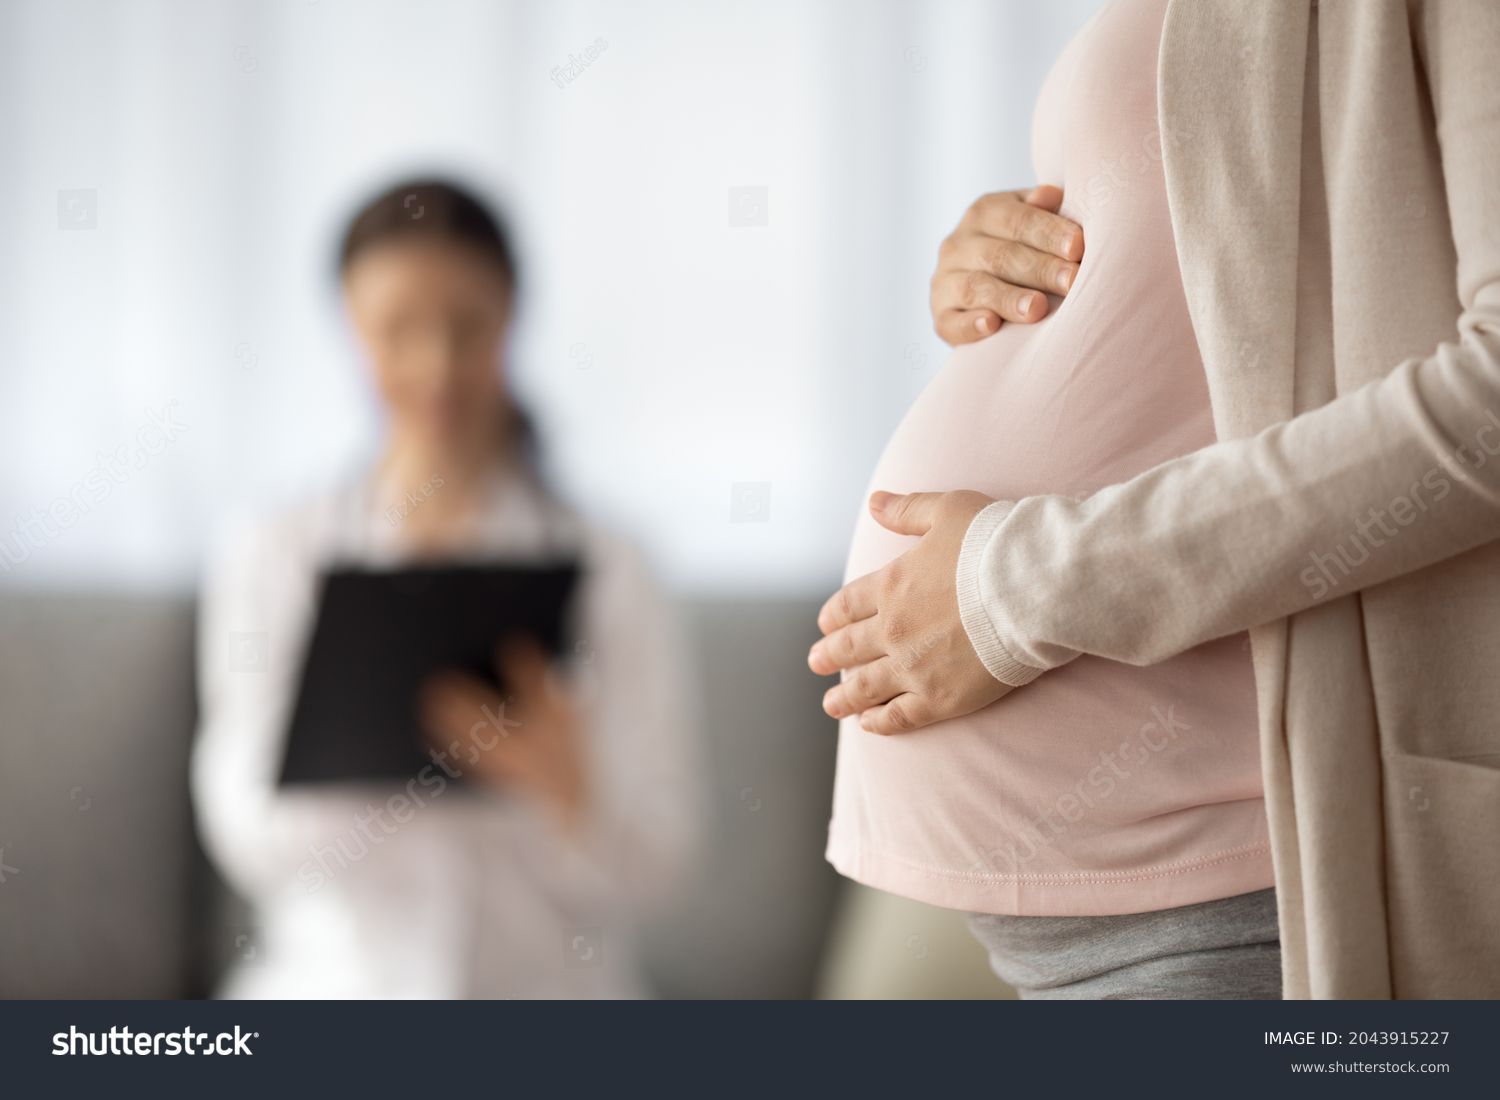 Preparing for baby birth. Close up of woman expecting baby having appointment with doctor at antenatal clinic prenatal healthcare center. Focus on young female holding hands on baby bump in doc office #2043915227